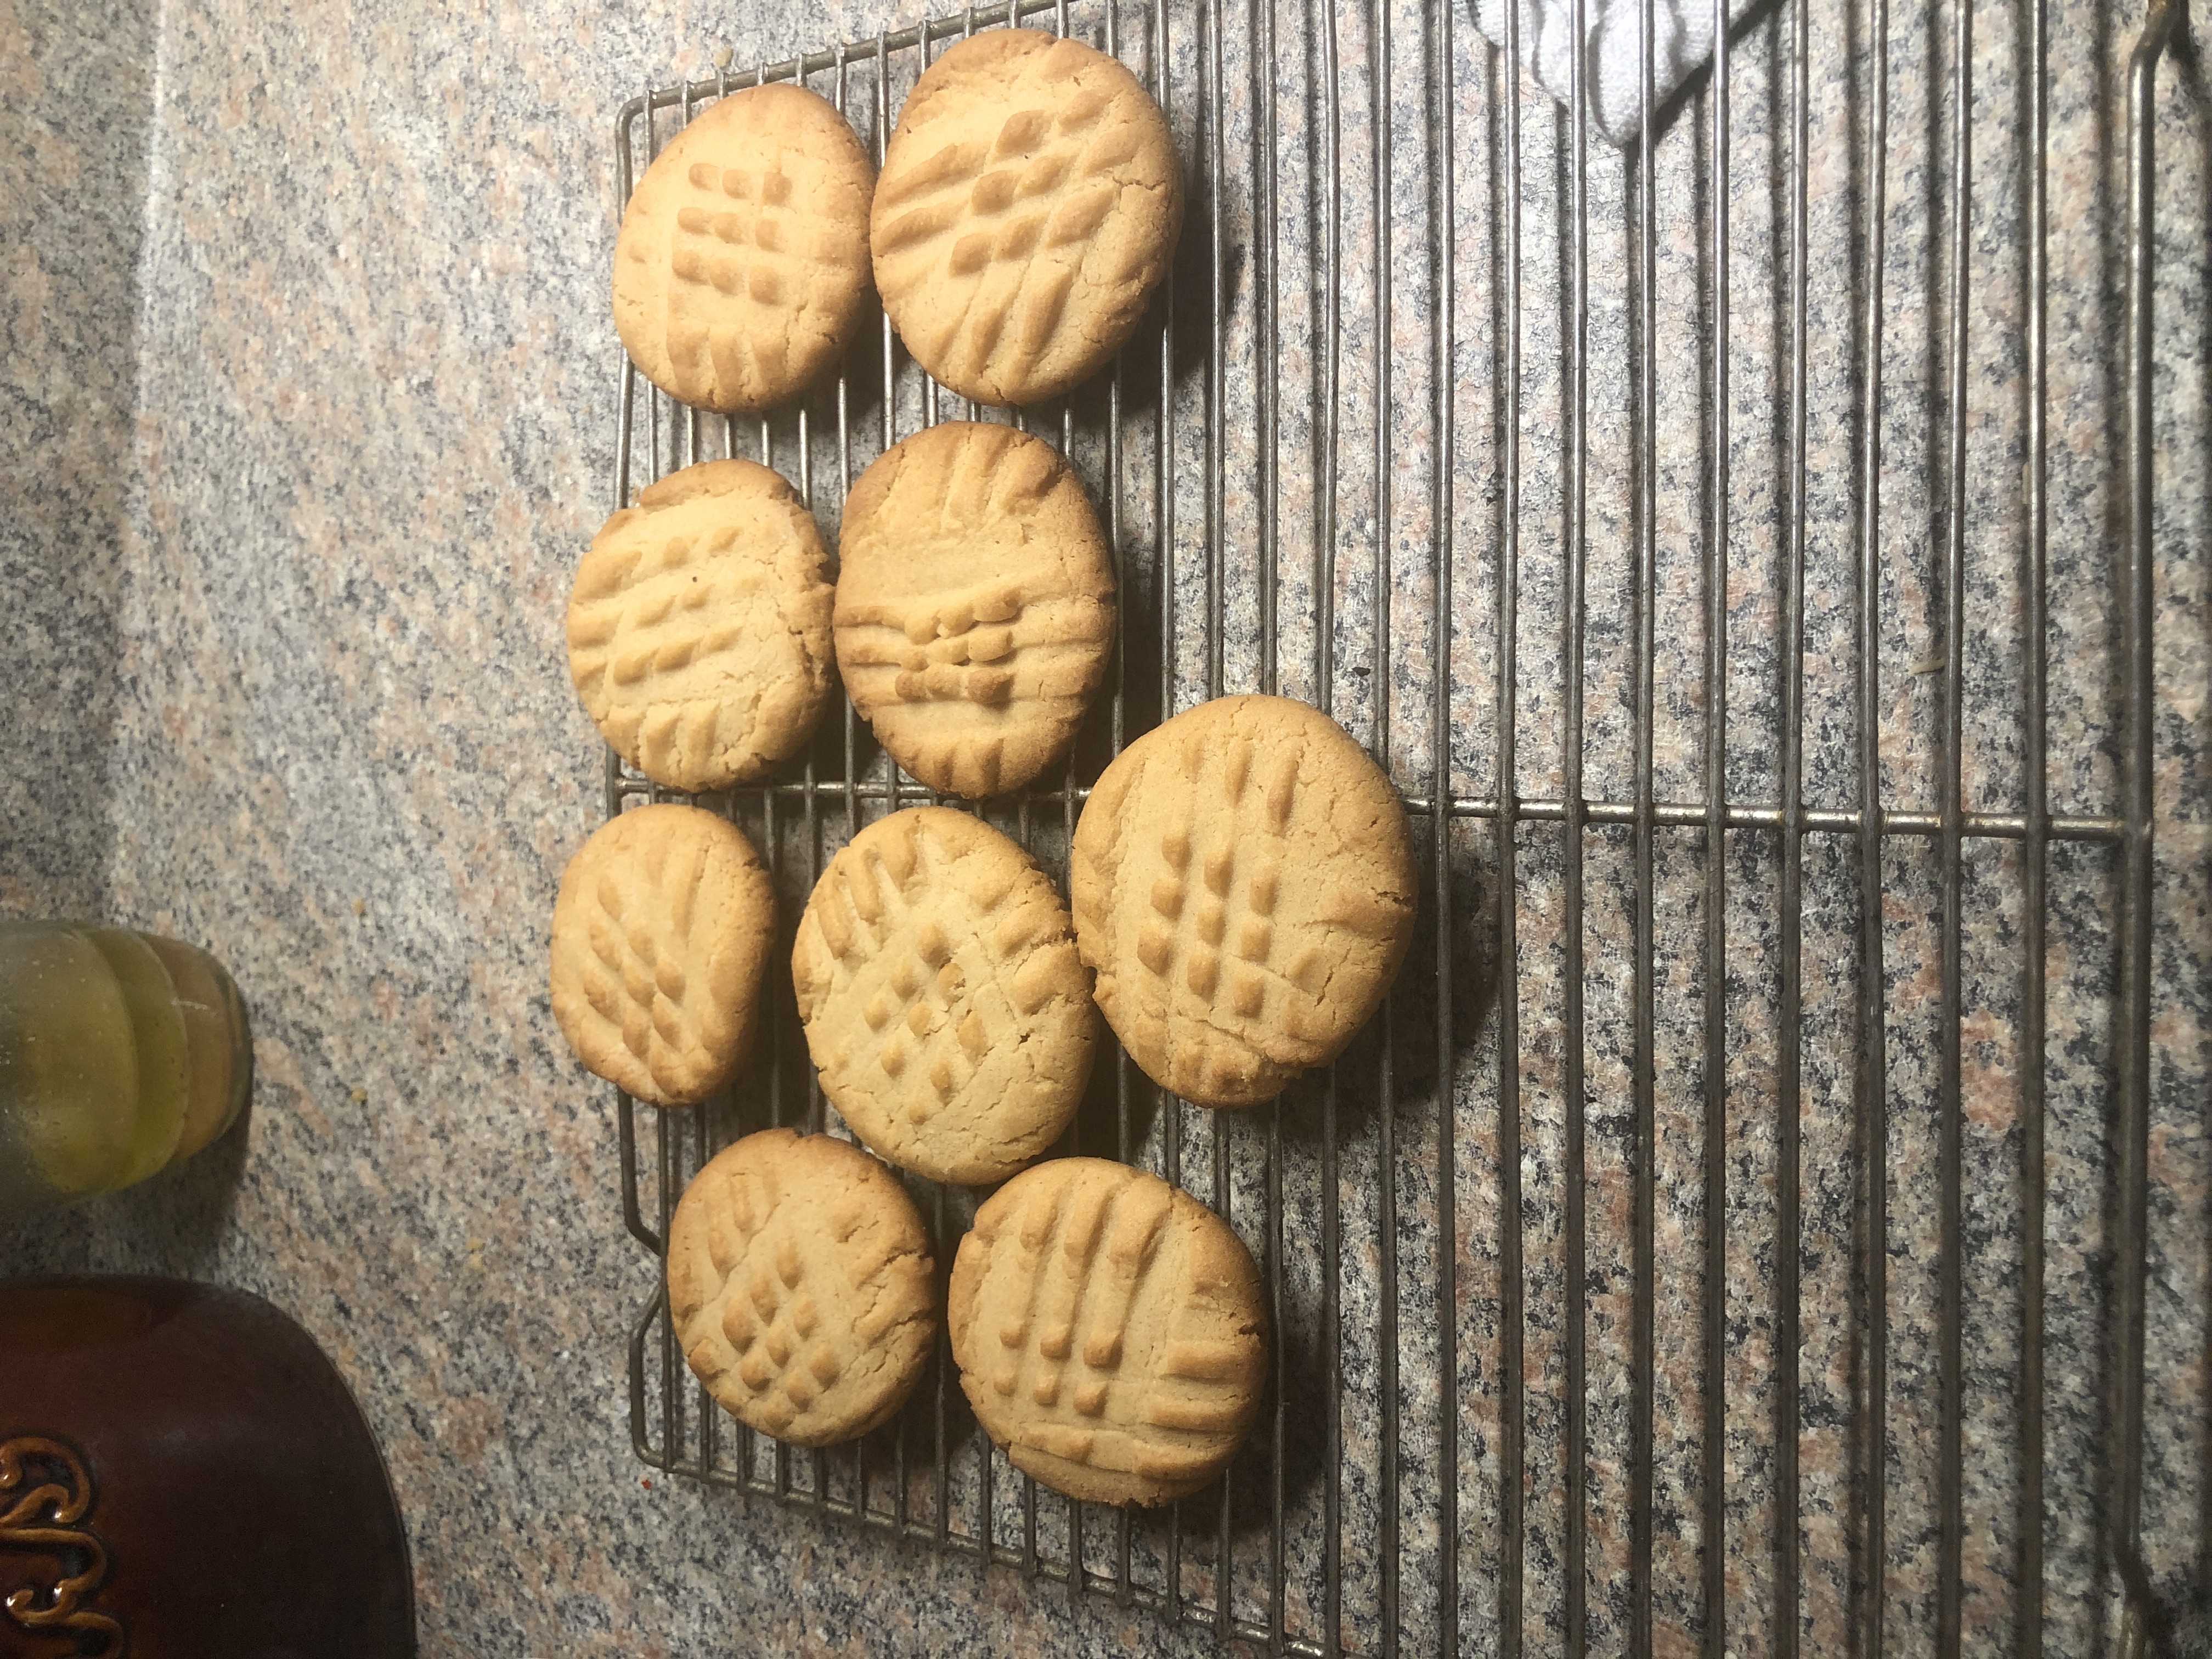 Classic Peanut Butter Cookies dlking0730